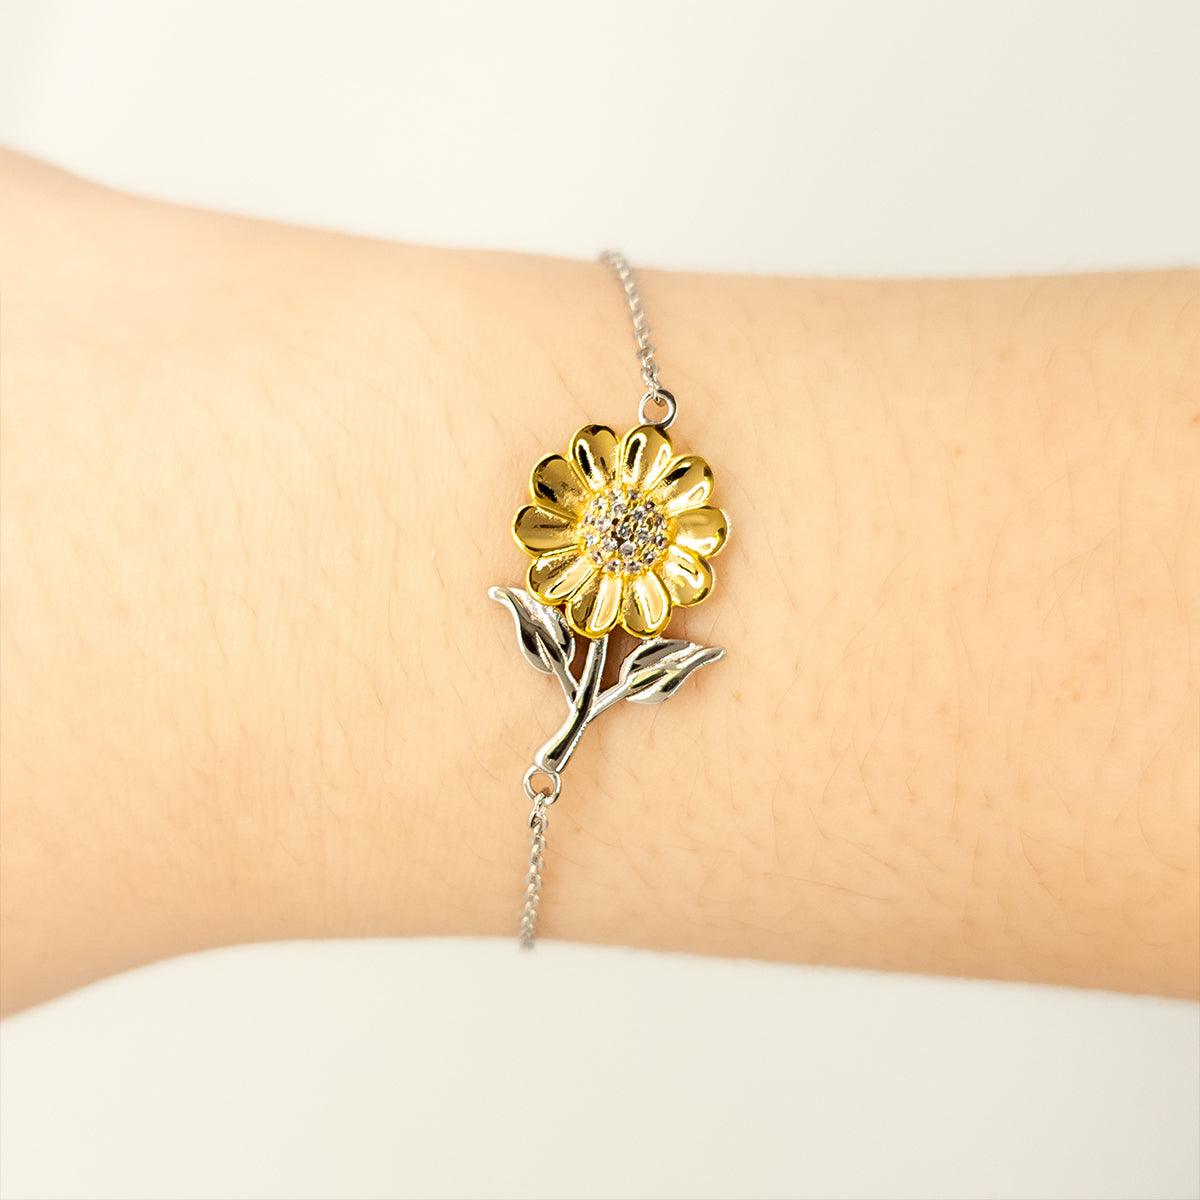 Remarkable Drafter Gifts, Your dedication and hard work, Inspirational Birthday Christmas Unique Sunflower Bracelet For Drafter, Coworkers, Men, Women, Friends - Mallard Moon Gift Shop